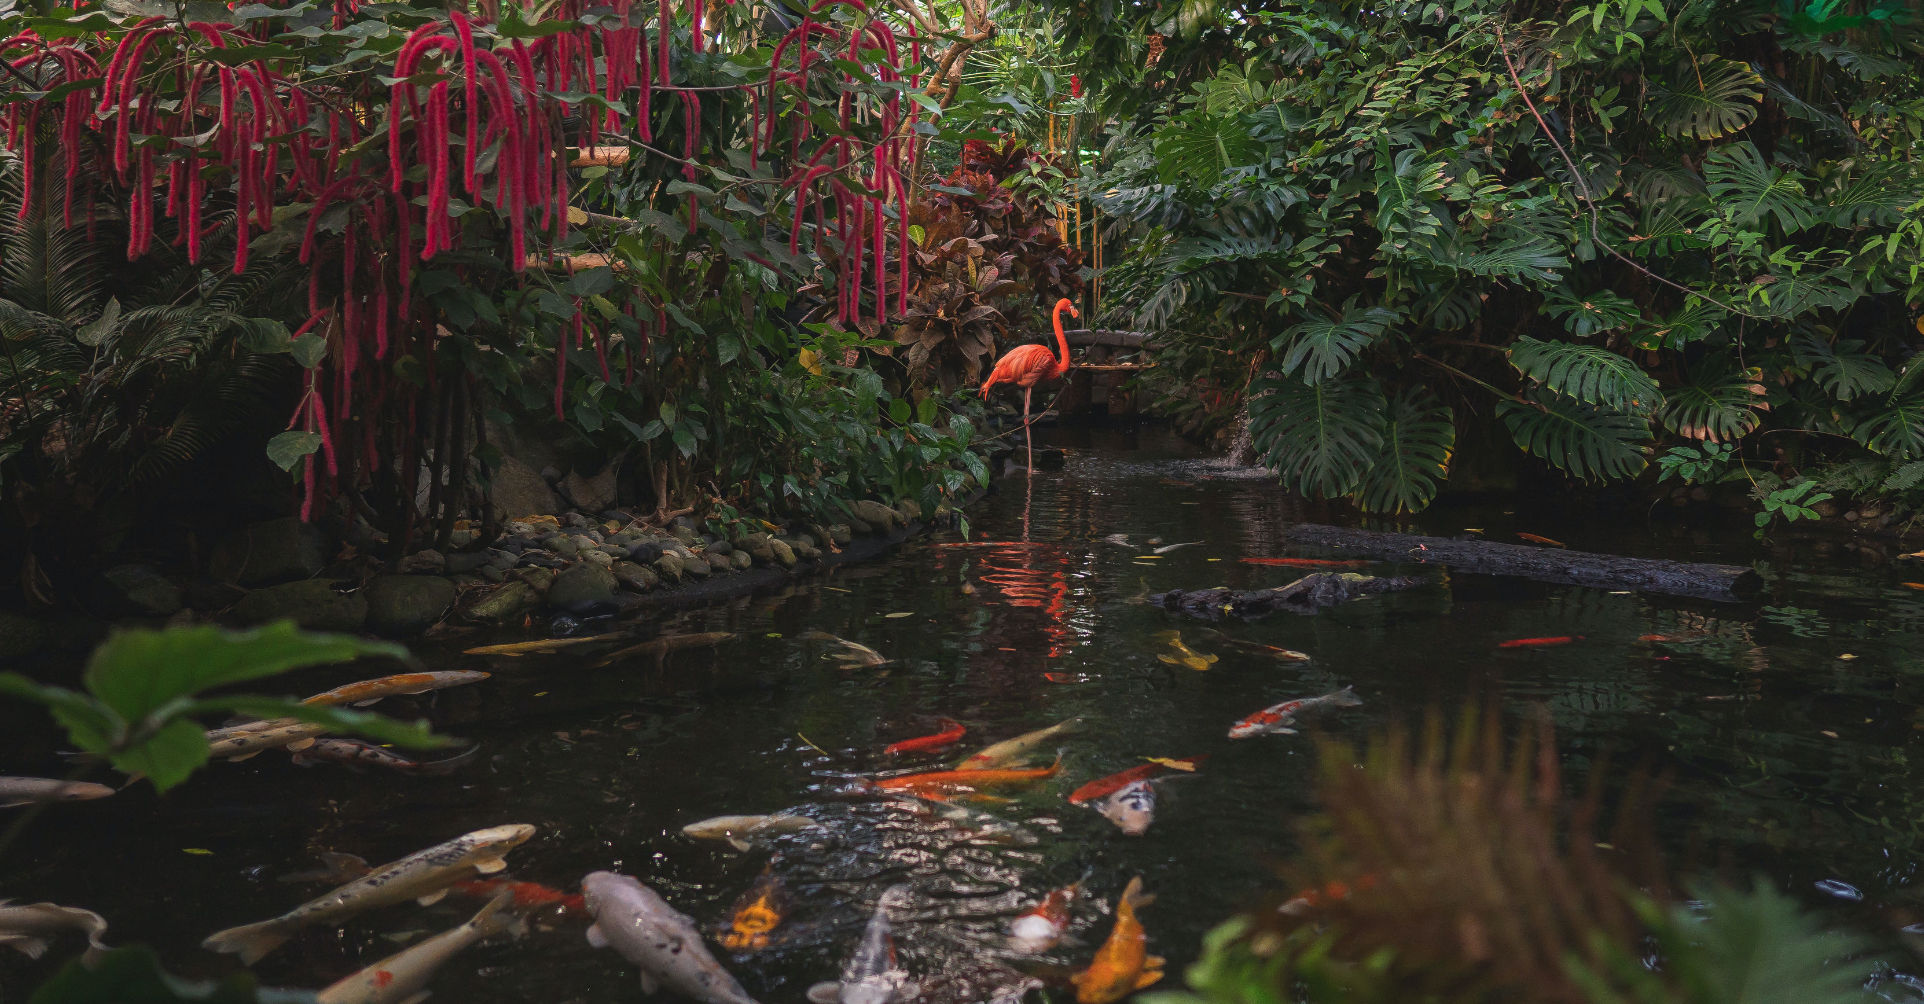 The Victoria Butterfly Gardens in Full Bloom with a Flamingo standing in a pond with Koi Fish swimming around